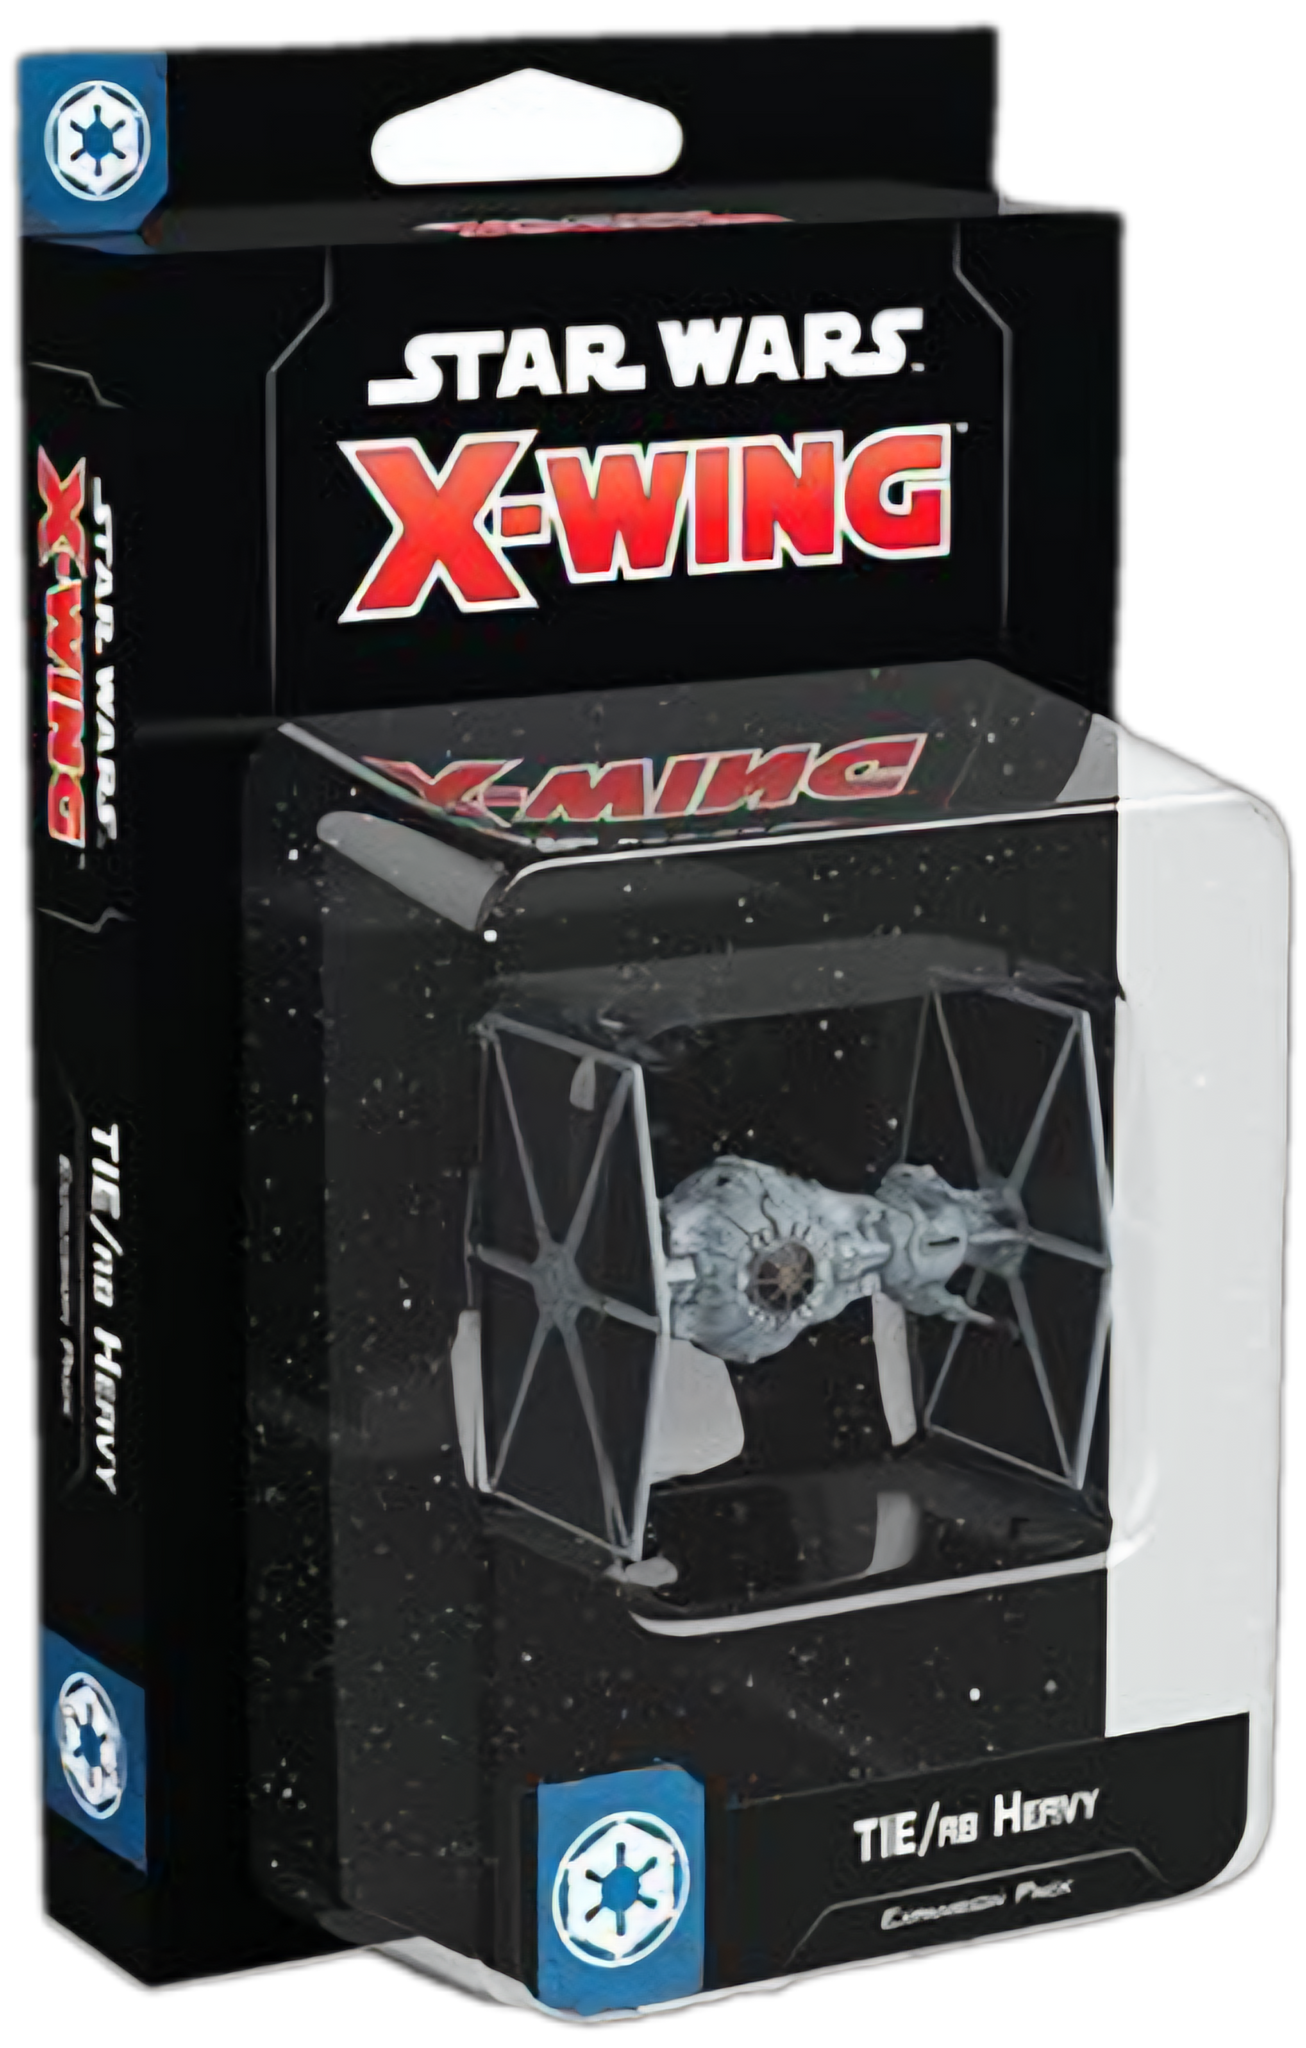 Star Wars: X-Wing 2nd Ed: TIE / Rb Heavy Expansion